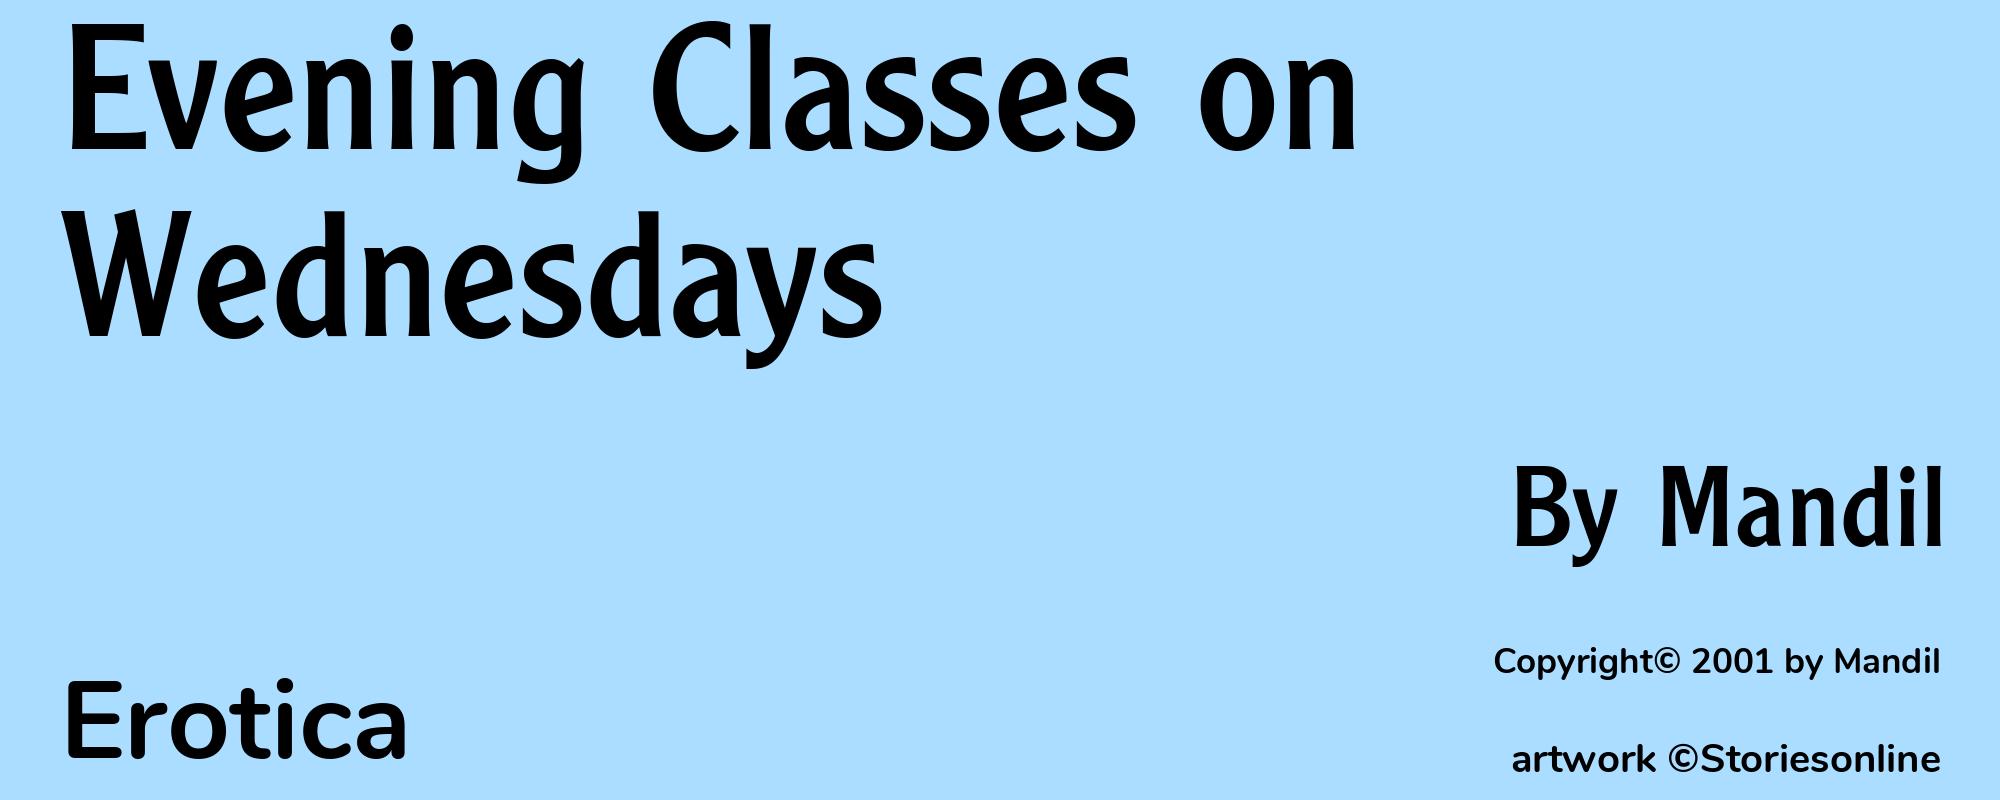 Evening Classes on Wednesdays - Cover